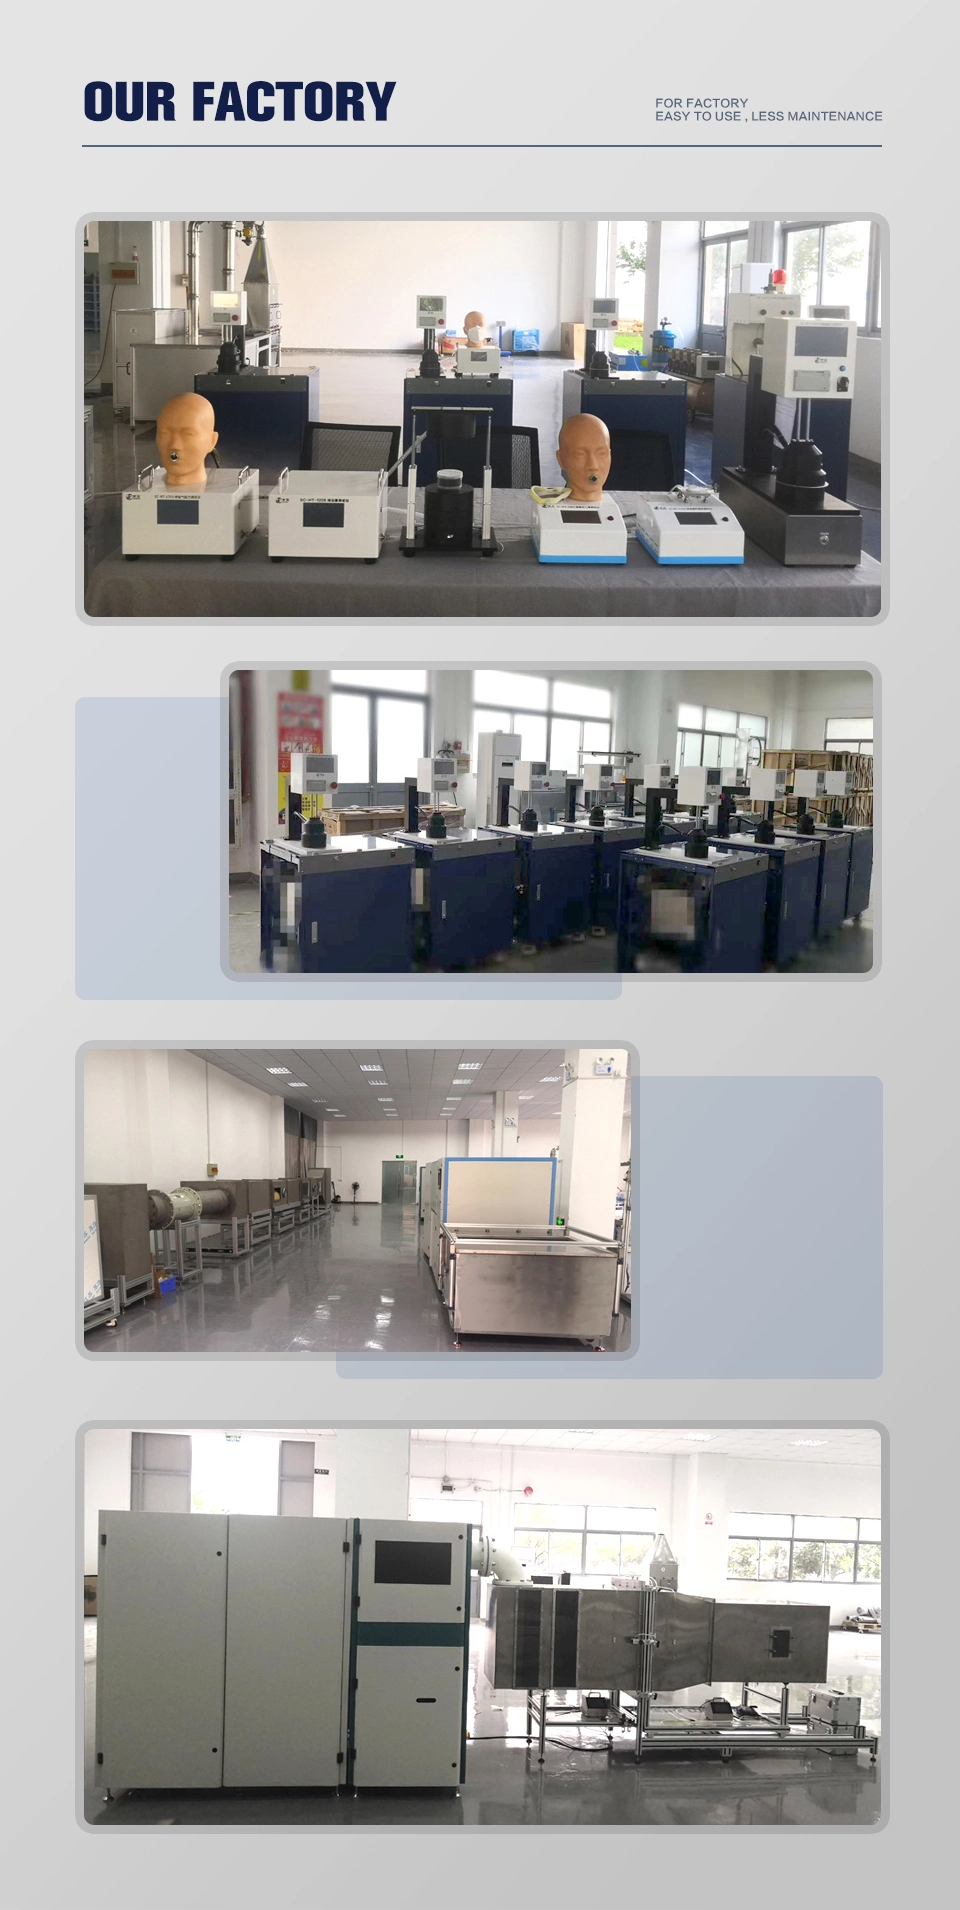 Filter and Air Purifier Test Equipment Counting Efficiency and Flow Rate-Resistance Curve Testing